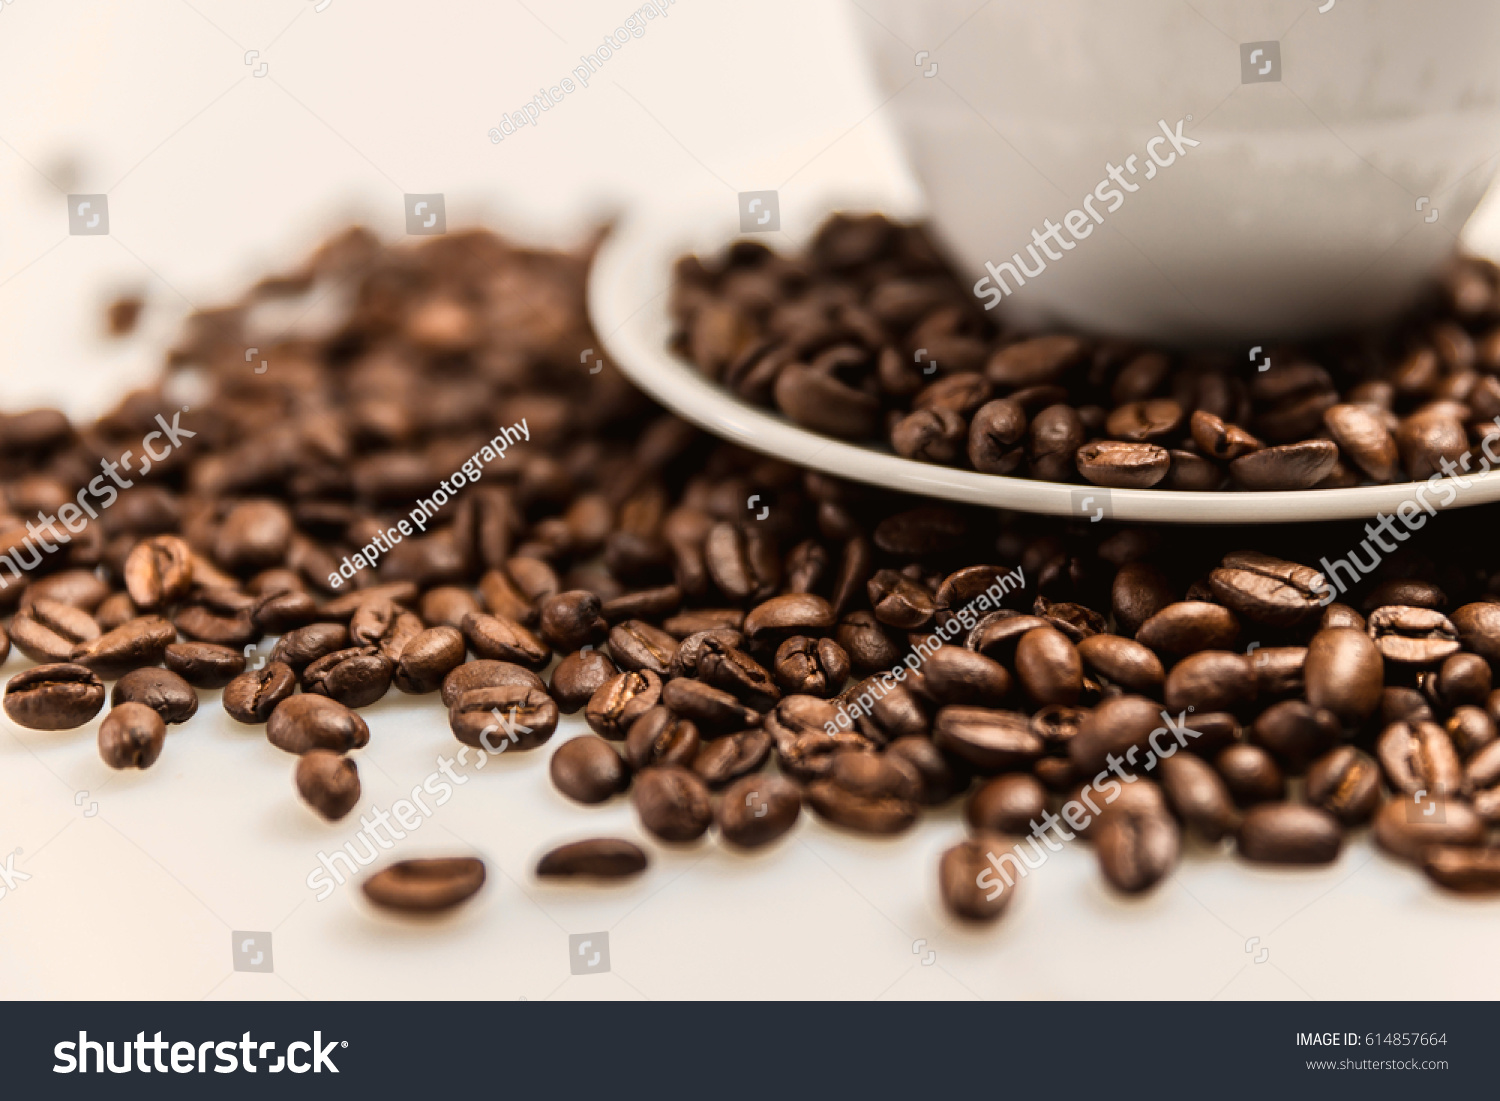 Download High Angle Closeup View Coffee Cup Stock Image Download Now Yellowimages Mockups